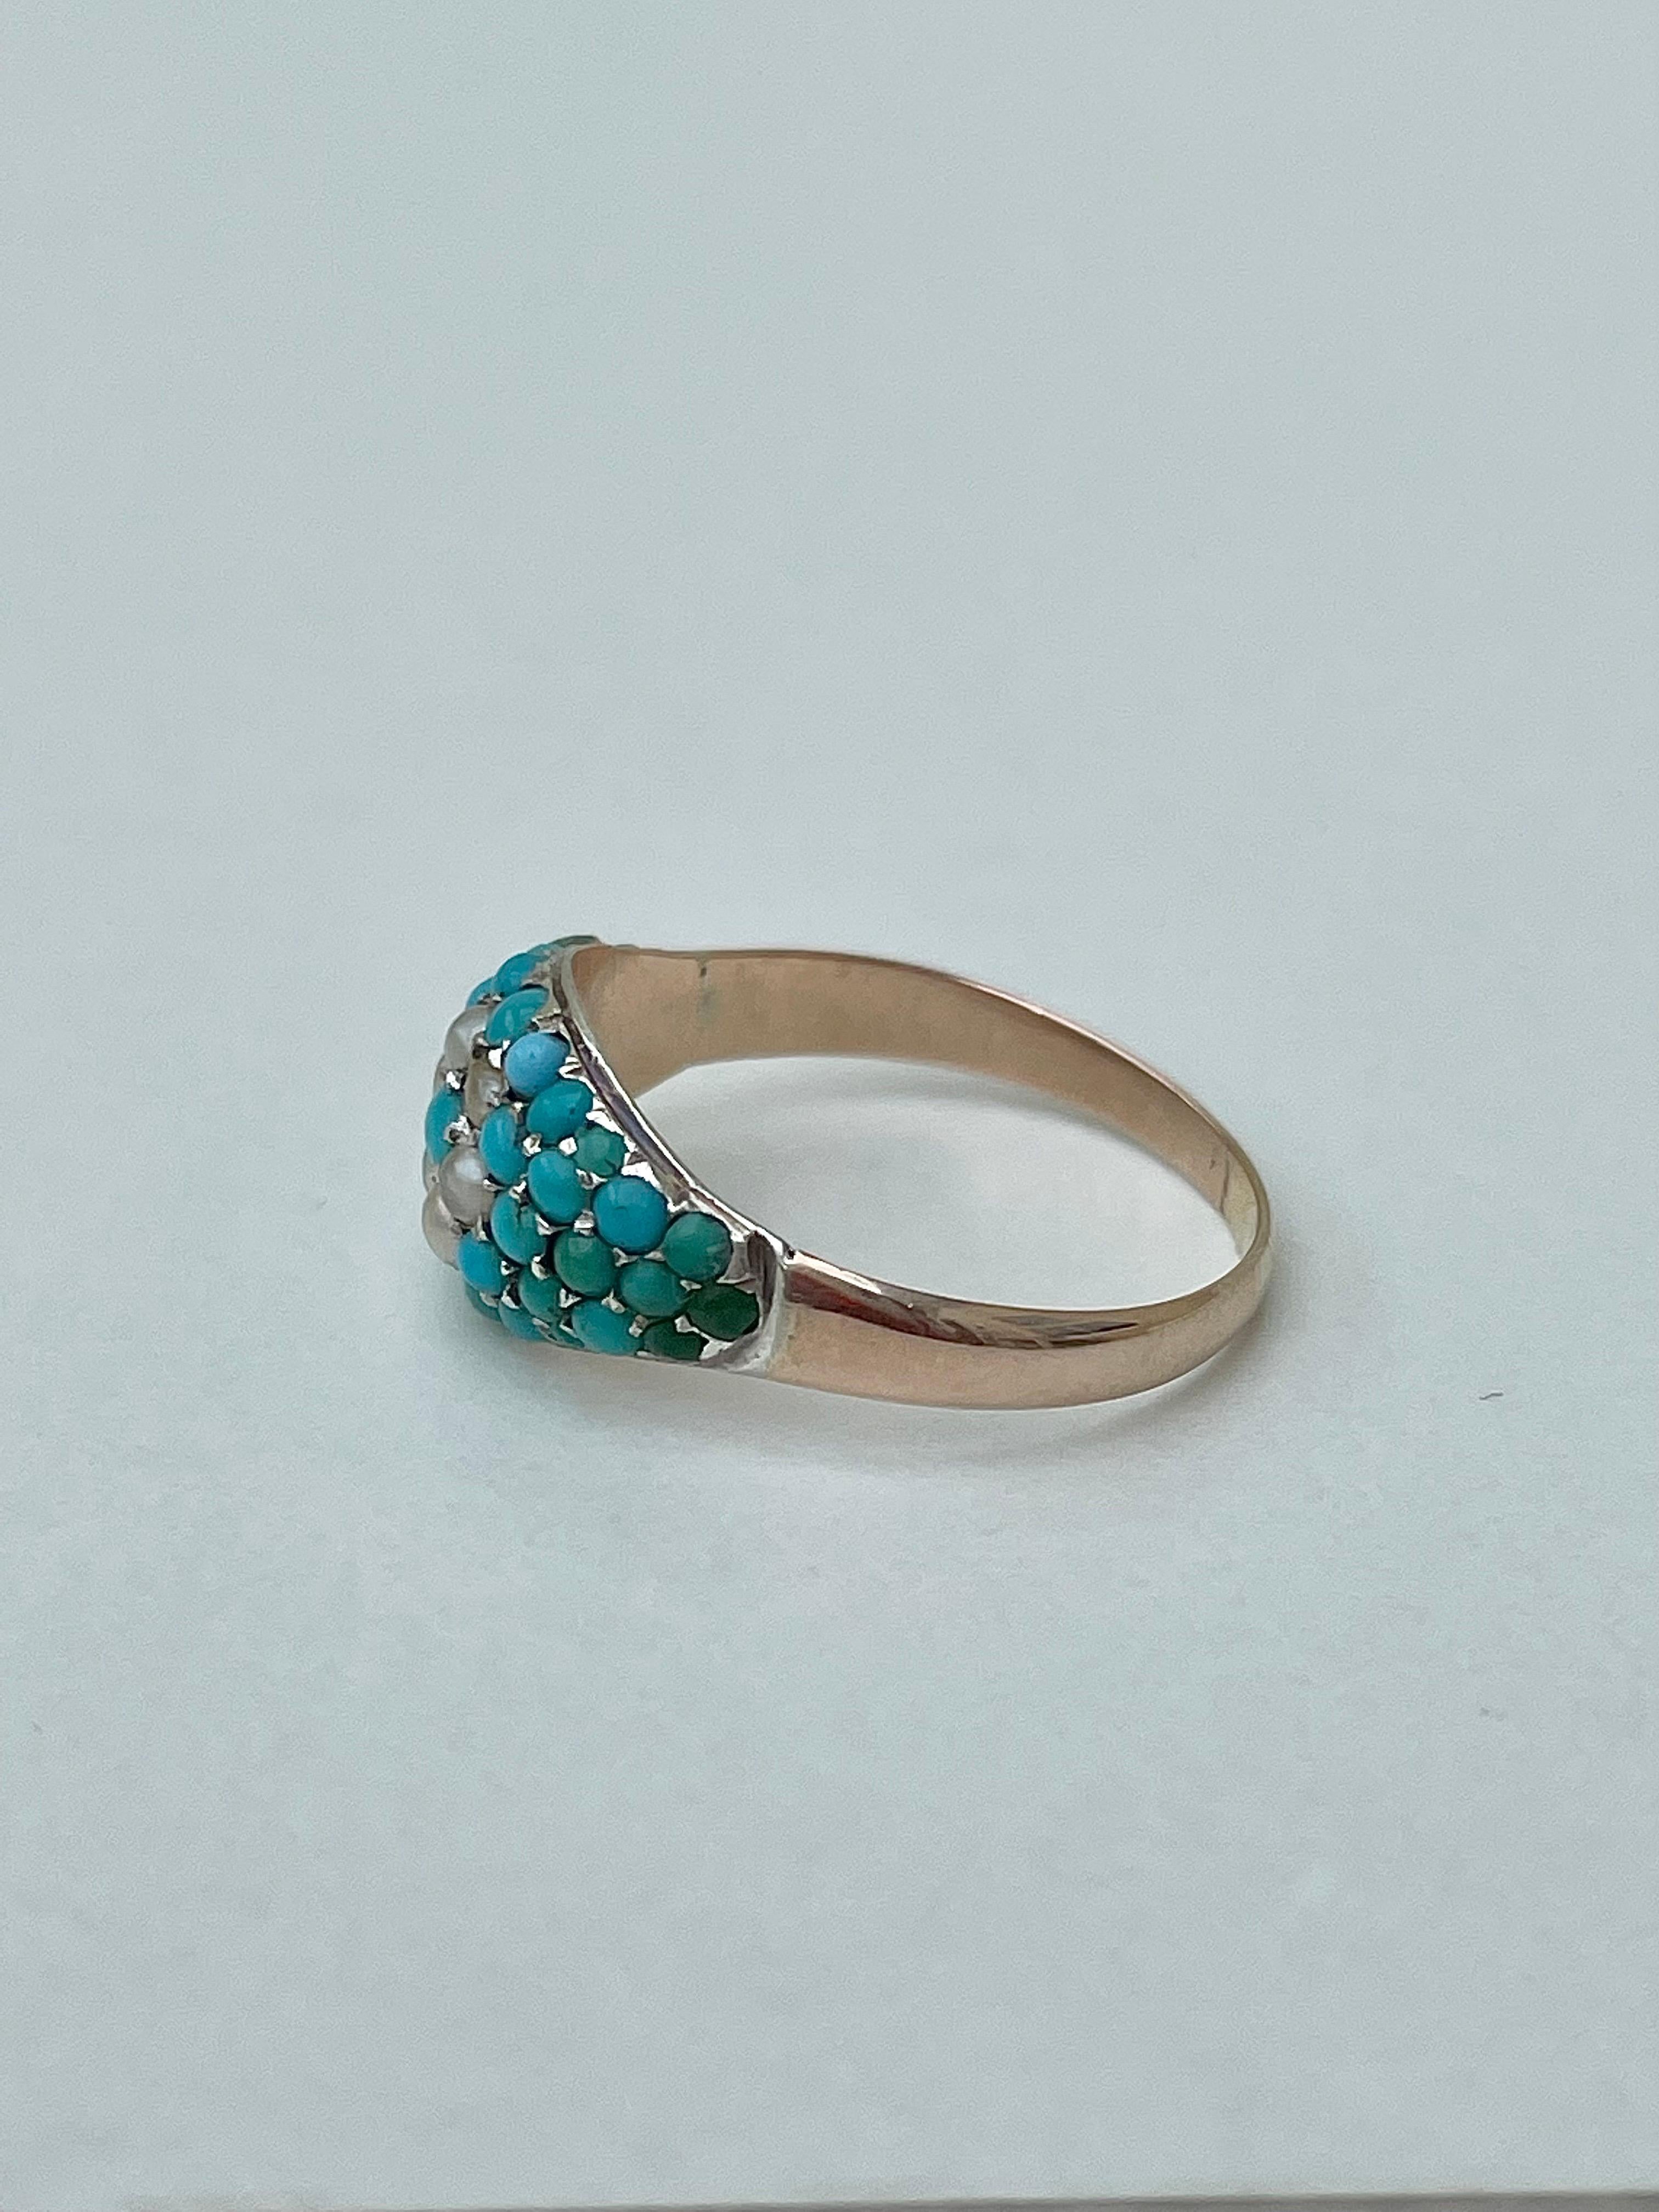 Antique Pearl and Turquoise Yellow Gold Ring 

darling turquoise and pearl small stones, so sweet 

The item comes without the box in the photos but will be presented in a  gift box

Measurements: weight 2.04g, size UK L1/2, head of ring 14.4mm x